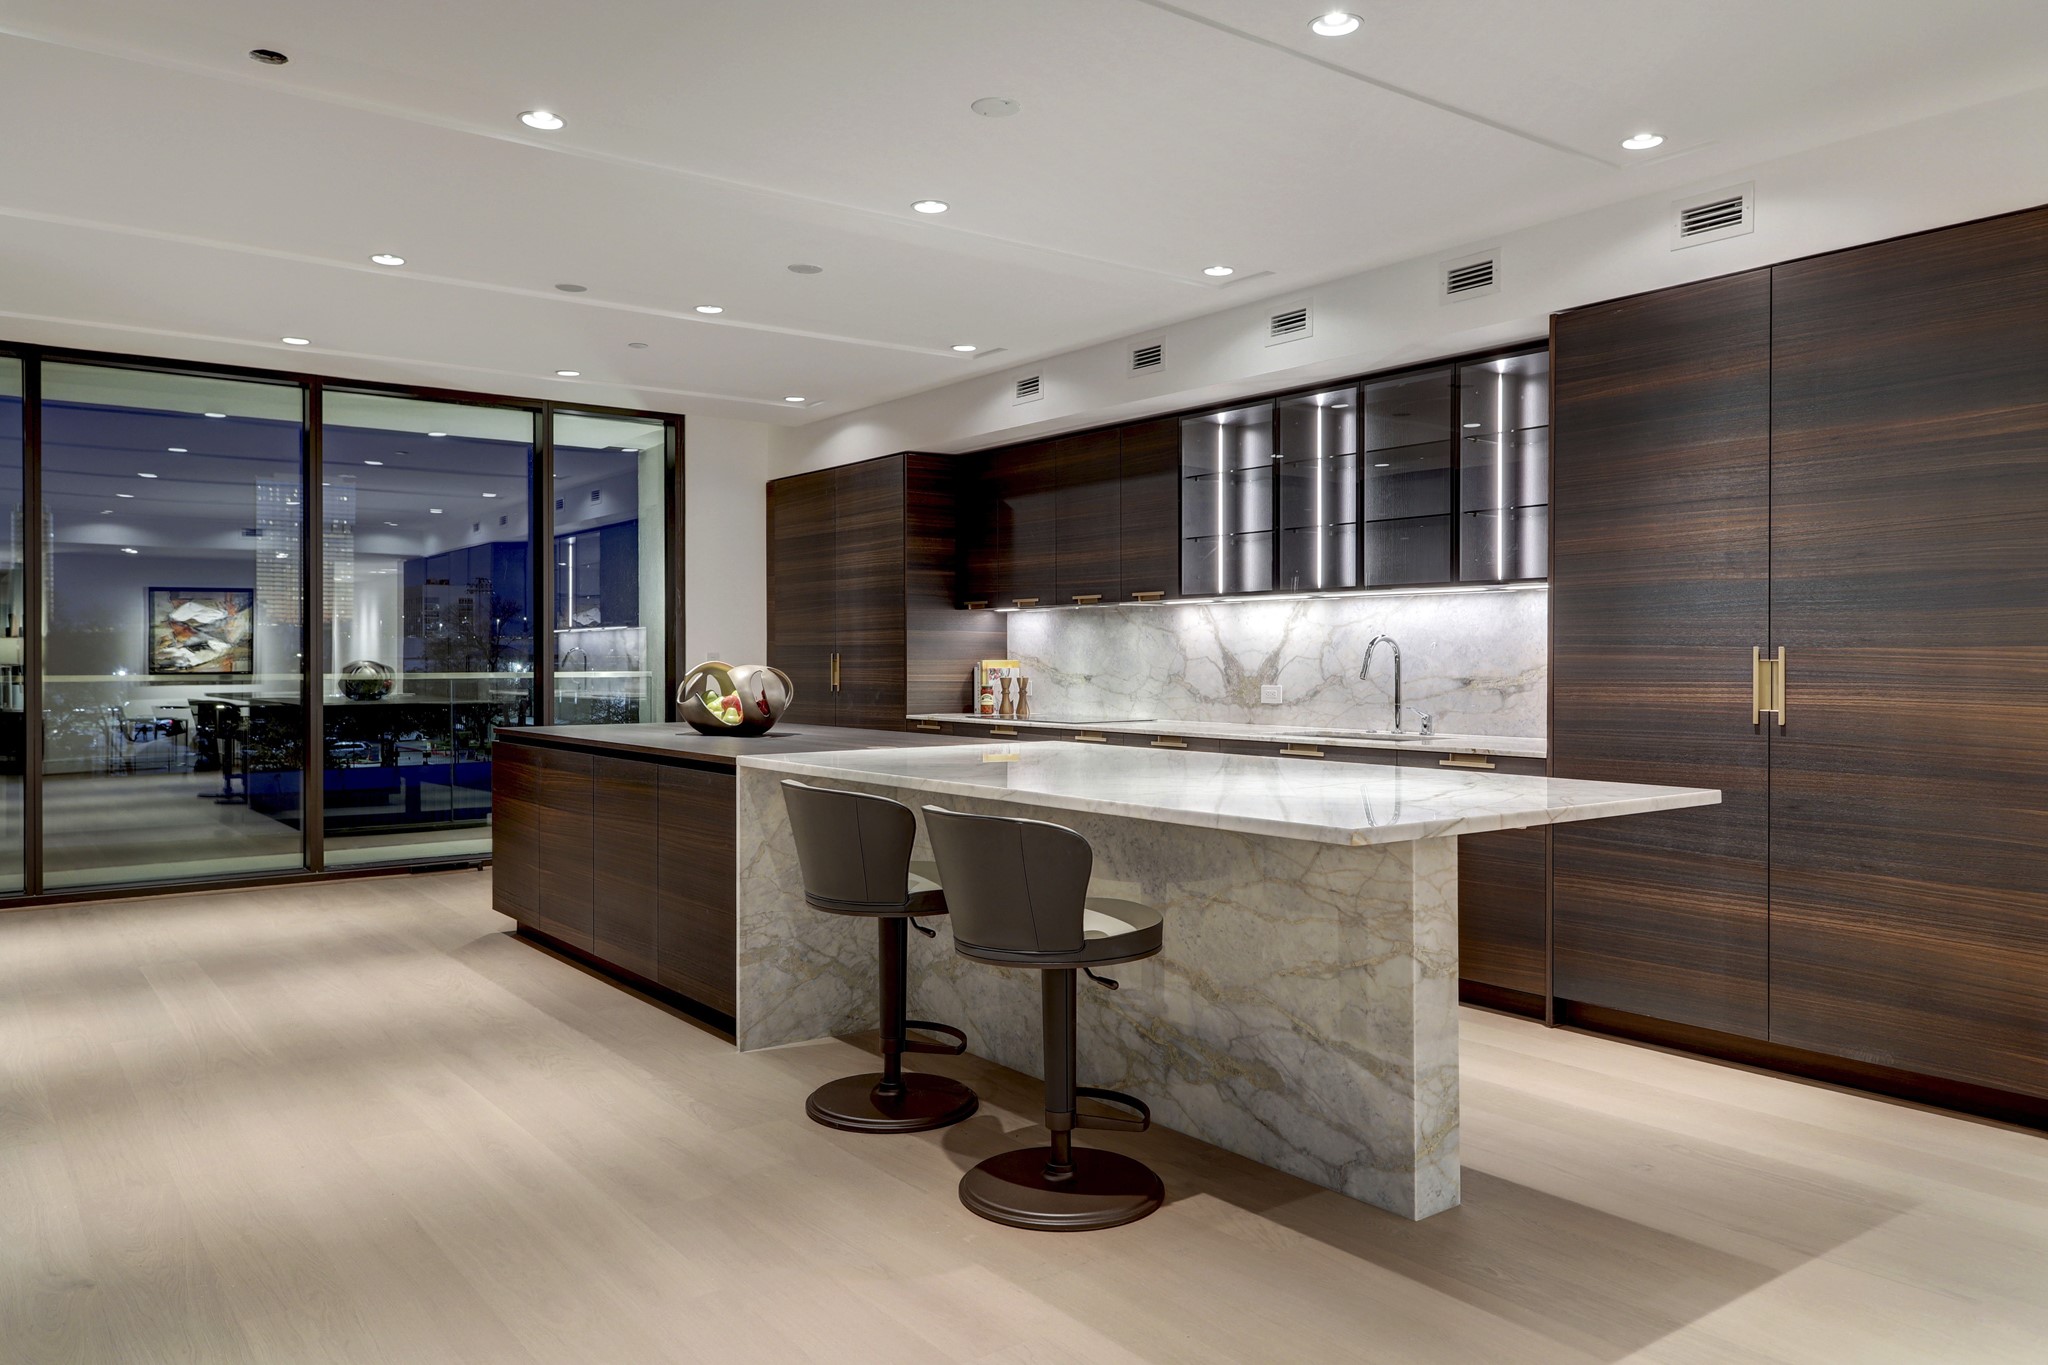 Wrought from rich wood and stunning marble, the primary kitchen's massive center island provides dedicated space for serving, casual dining and stimulating conversation.